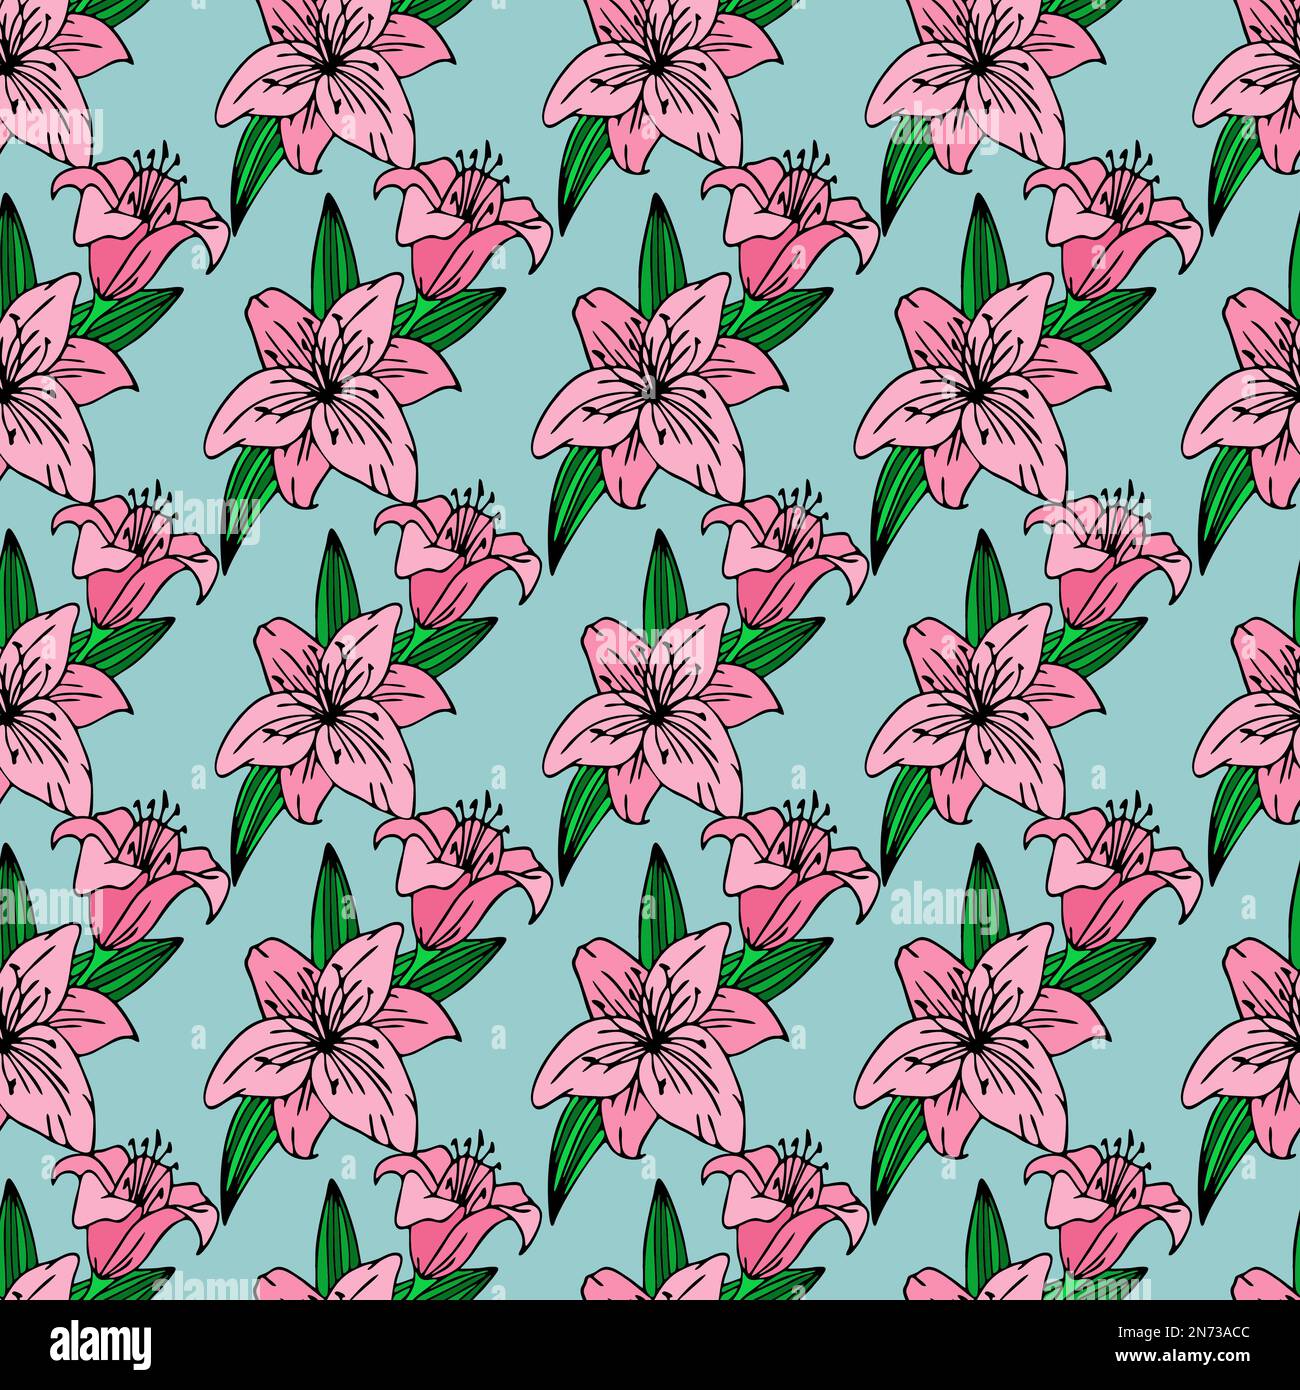 seamless repeating pattern of large pink lily flowers on a light blue background, texture, design Stock Photo